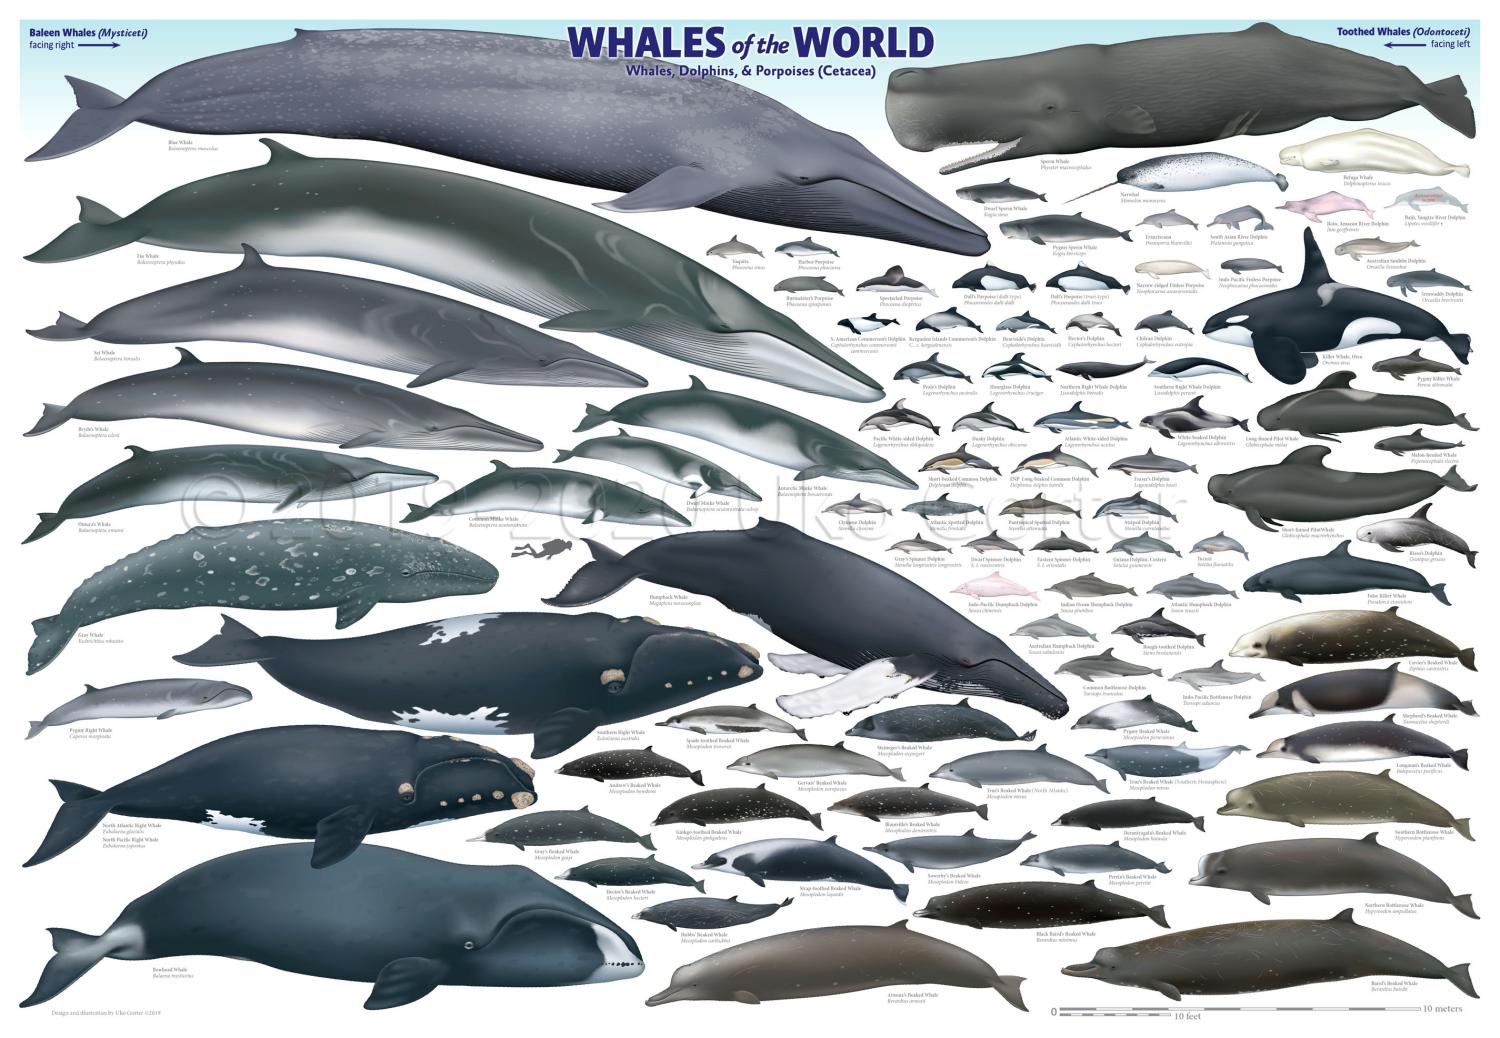 'Whales of the World' poster by Uko Gorter Natural History Illustrations